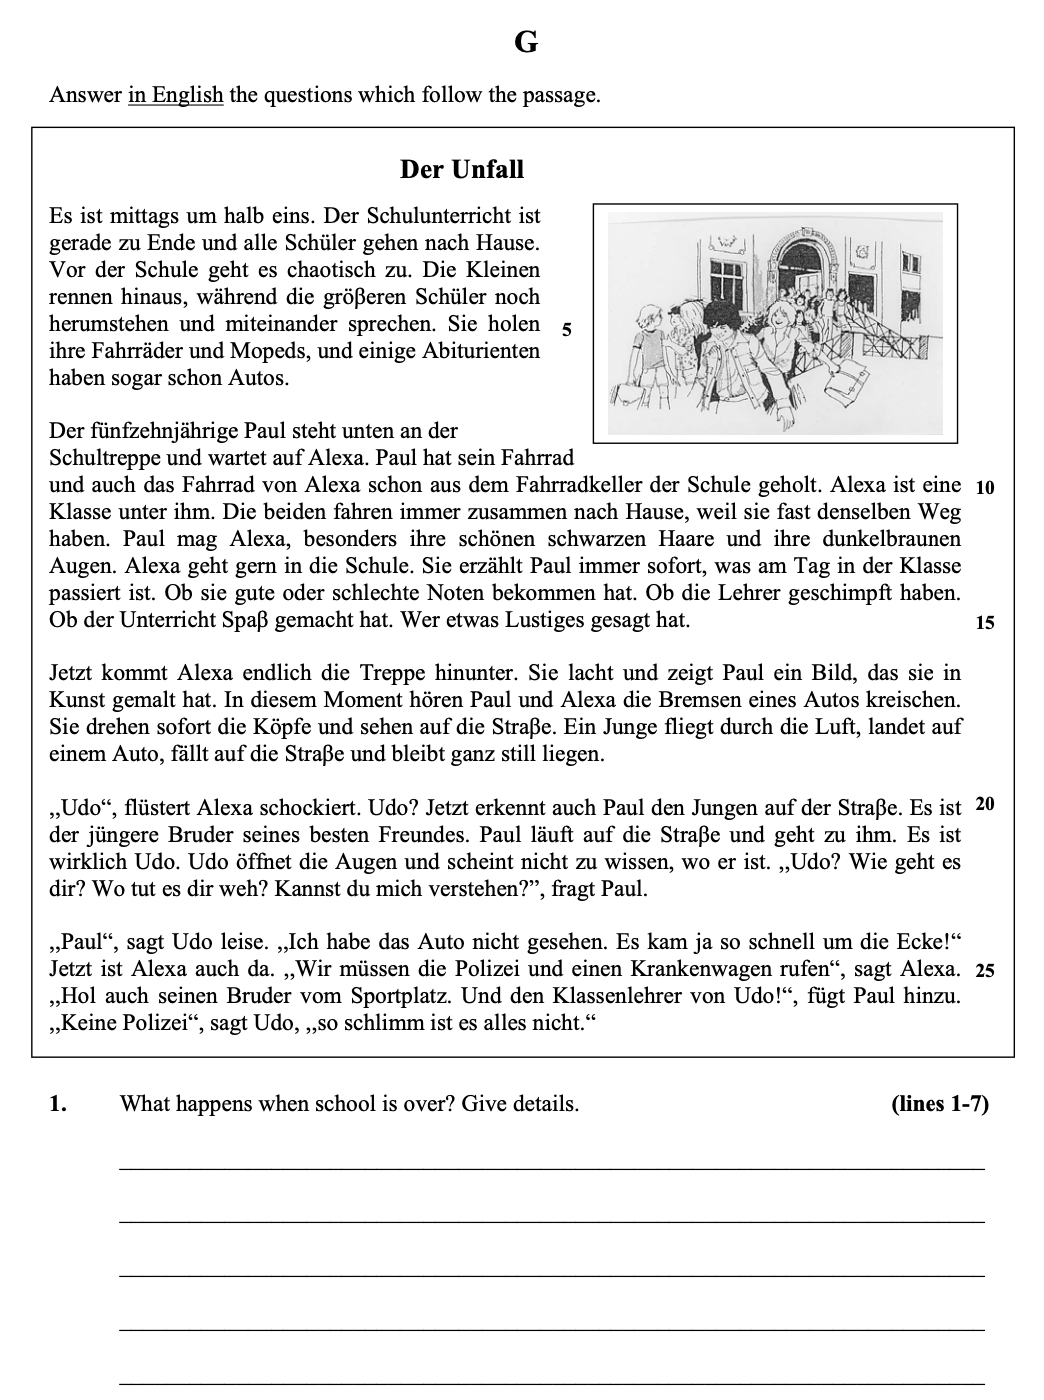 an image of the question 2004 Sec2 G which is about the topic read long text and the subject is Junior Certificate german